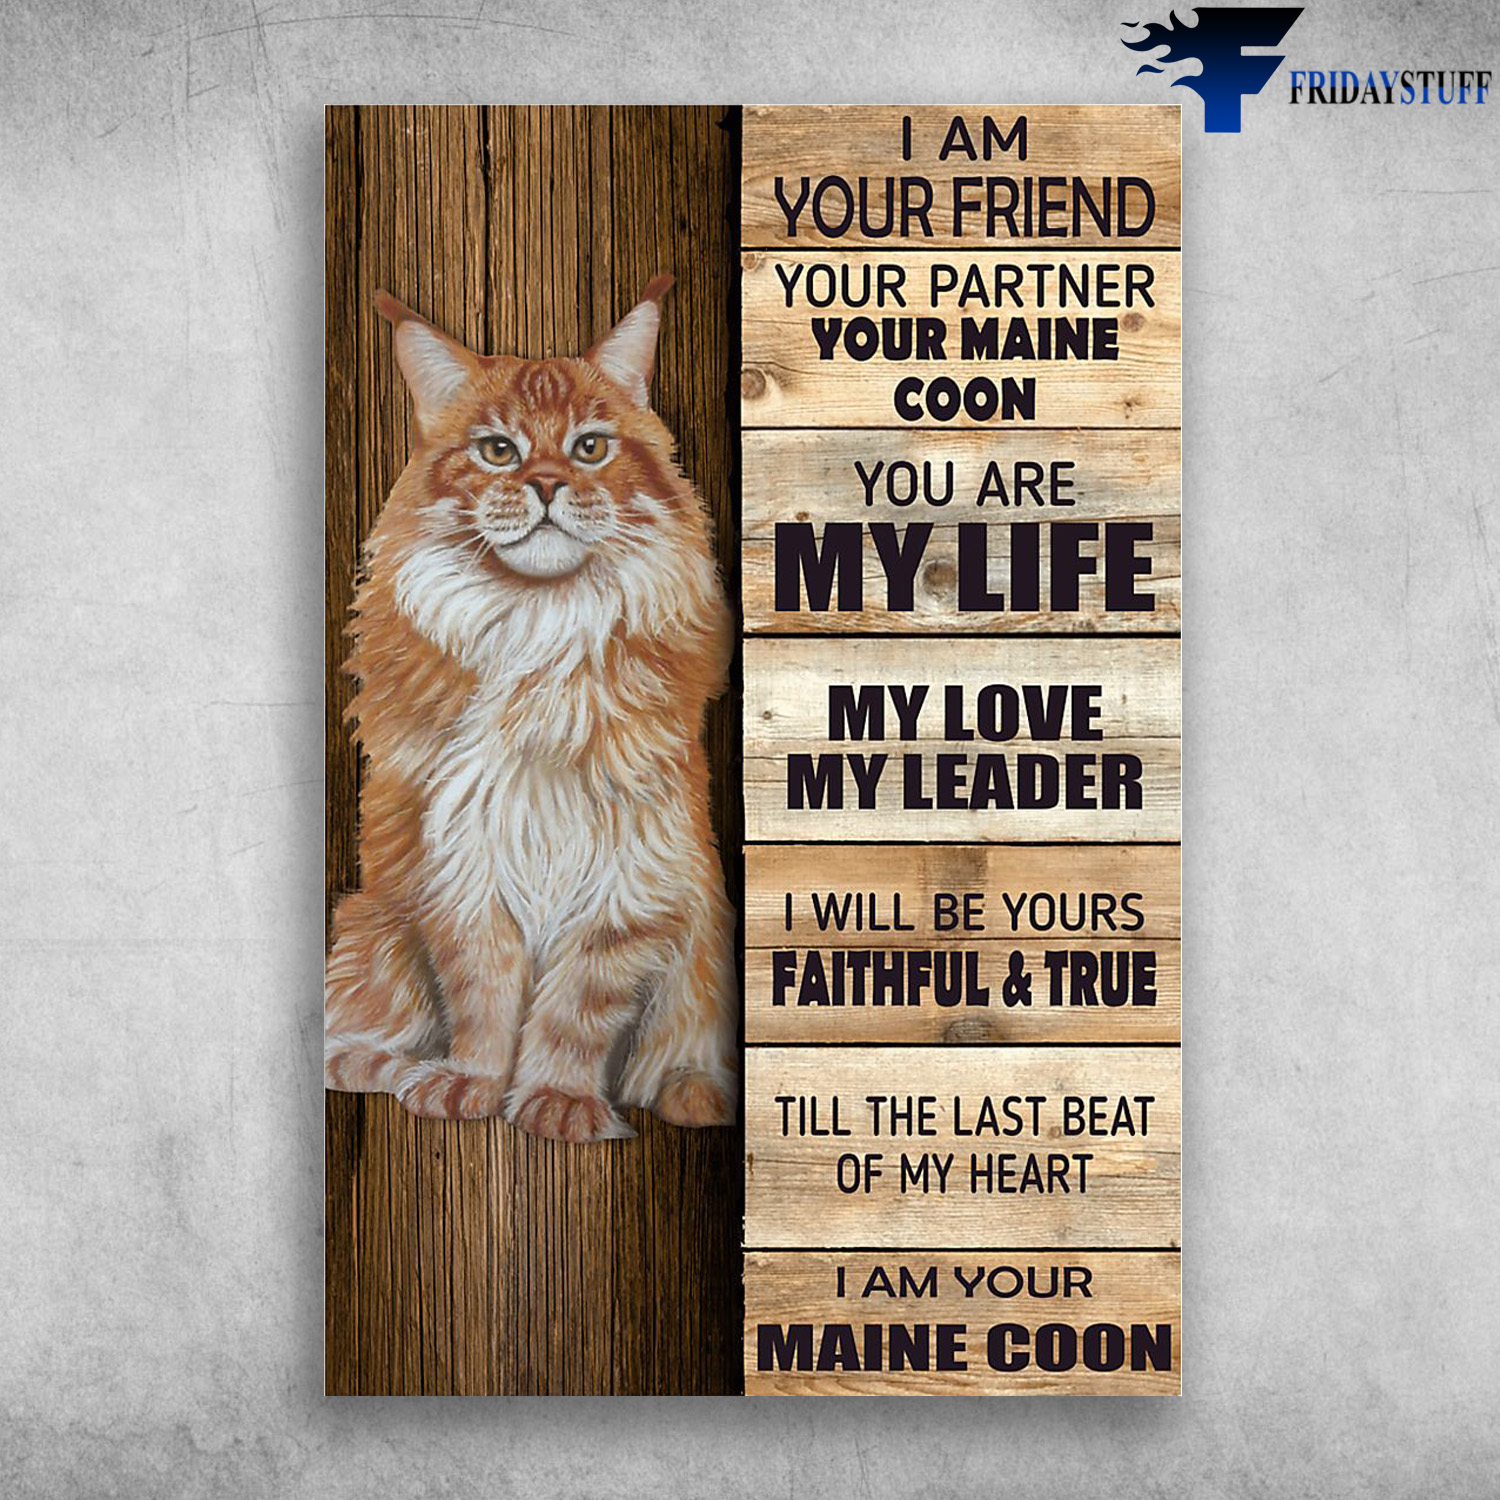 Maine Coon - I Am Your Friend, Your Partner, Your Maine Coon, You Are My Life, My Love, My Leader, I Will Be Yours Faithfull And True, Till The Last Beat Of My Heart, I Am Your Maine Coon